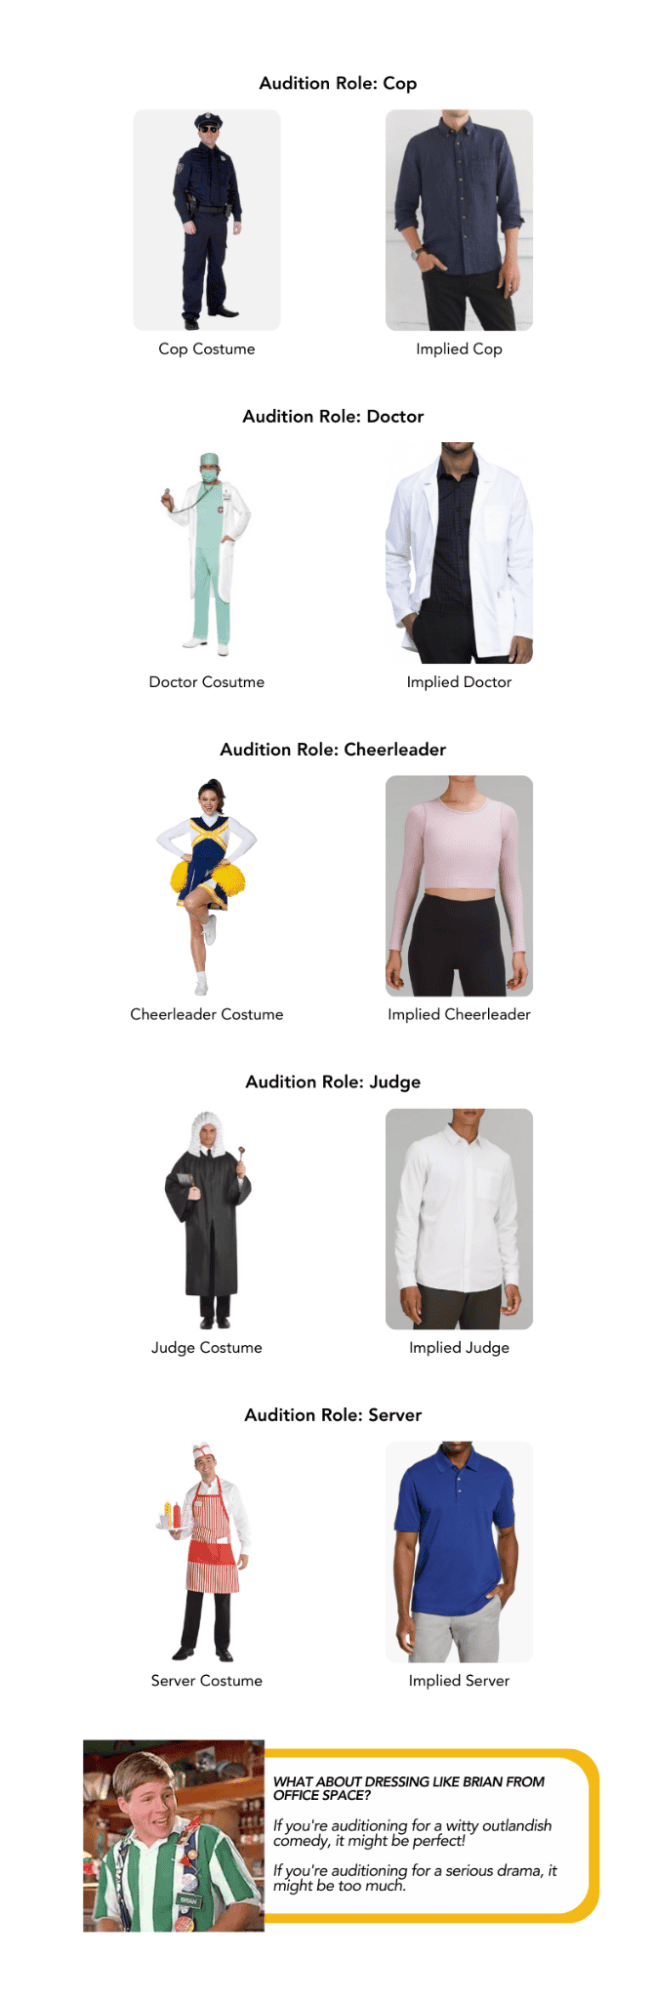 audition clothing example